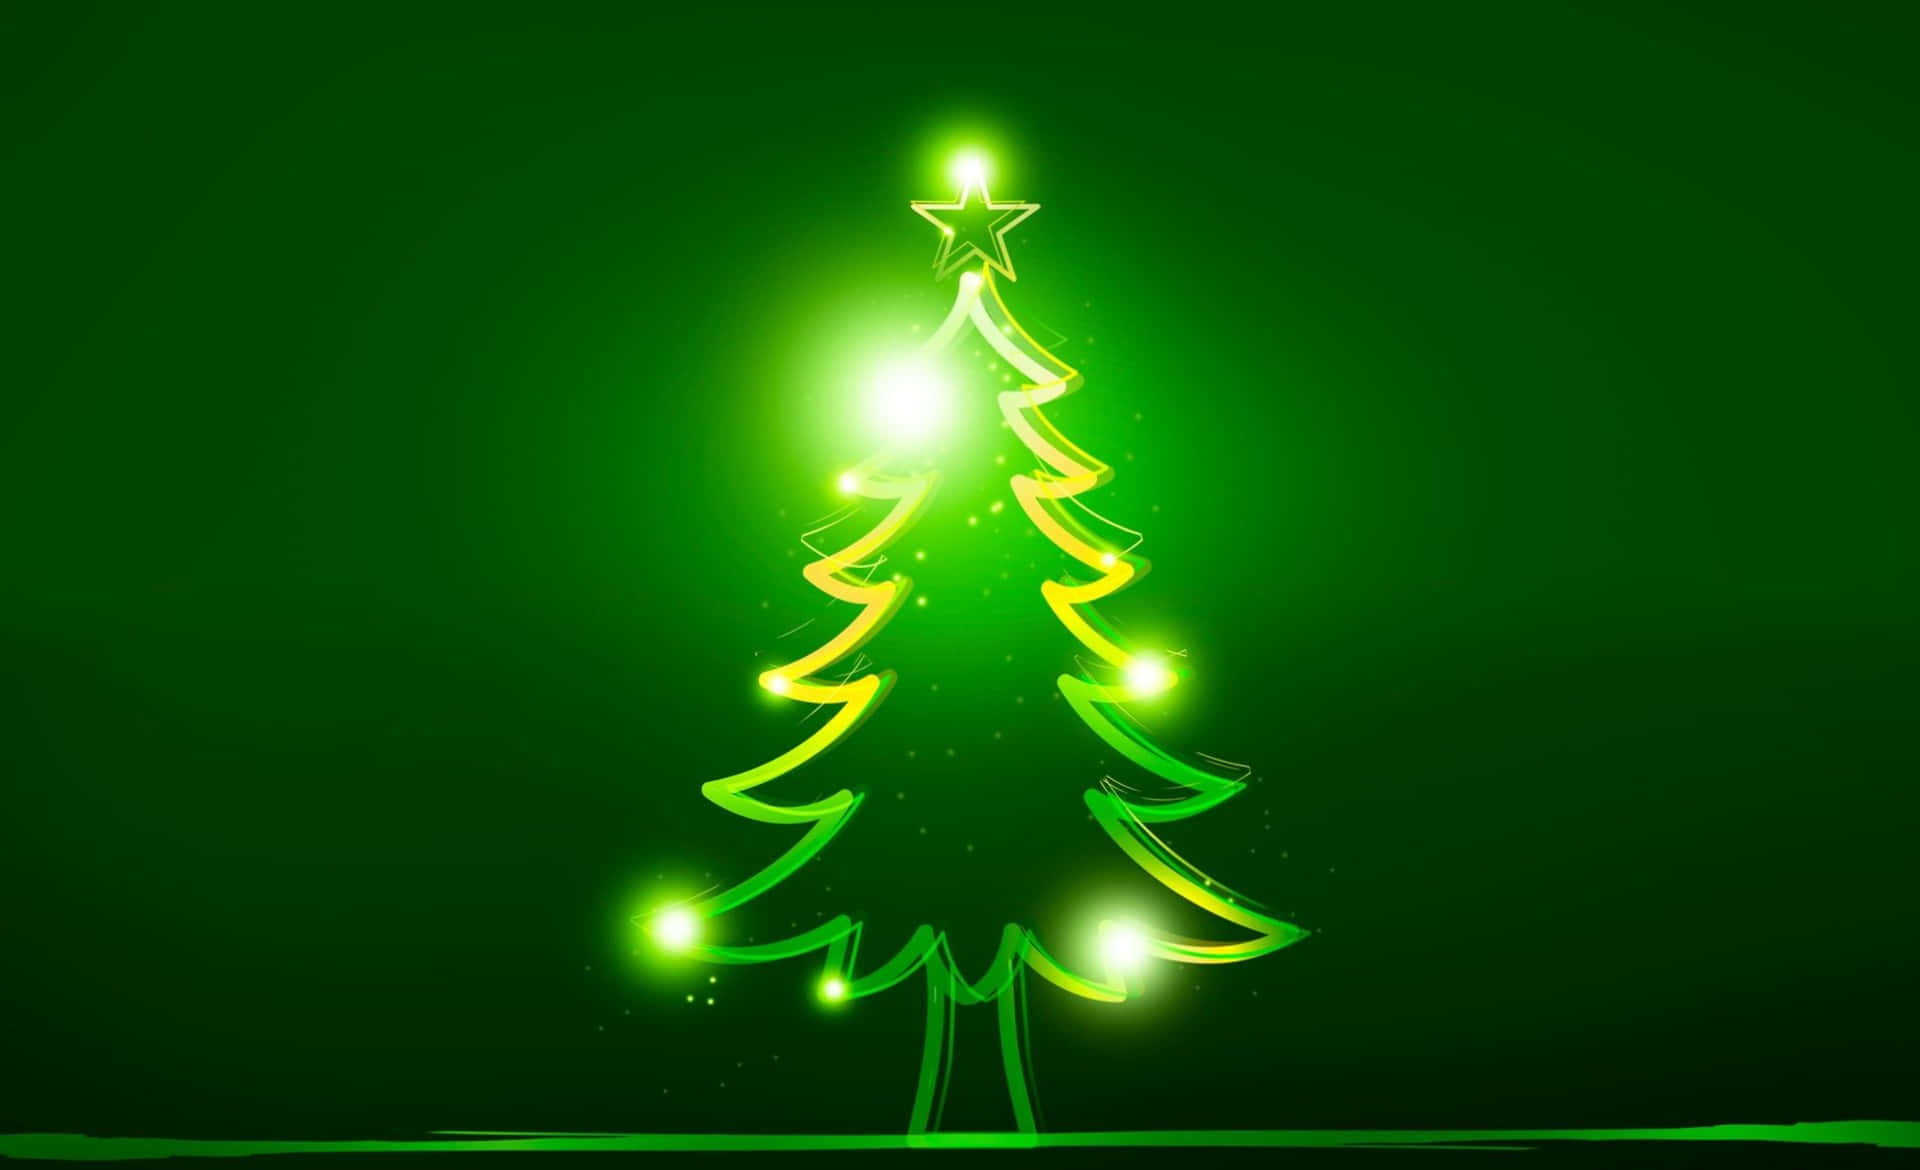 A Green Christmas Tree On A Dark Background Wallpaper